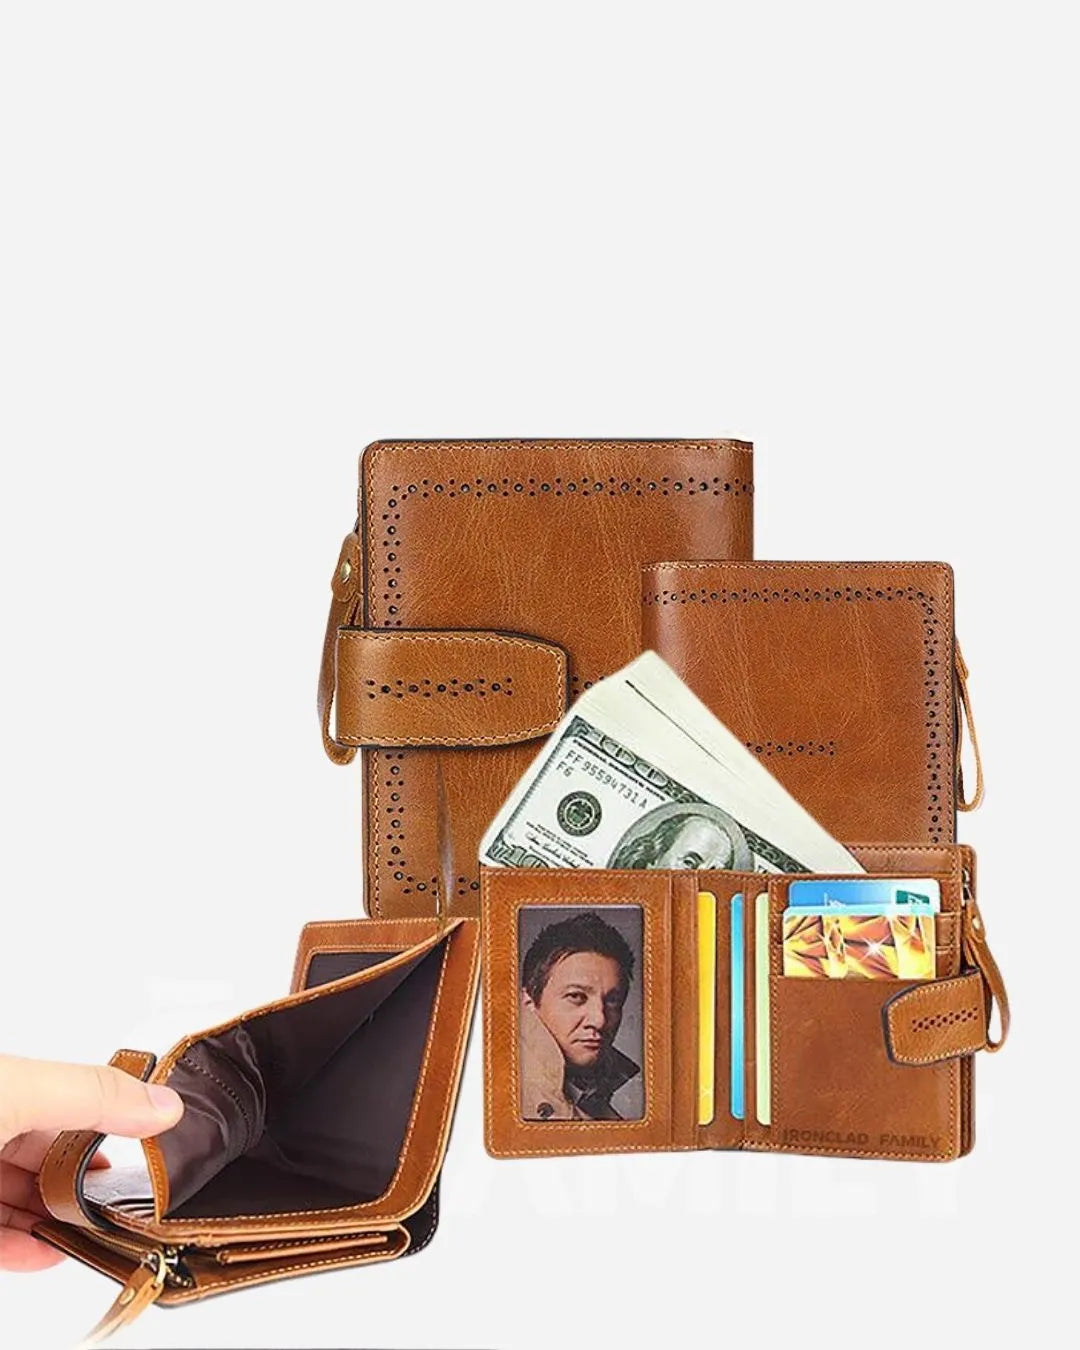 RFID blocking wallet with an illustration of a man holding a dollar bill